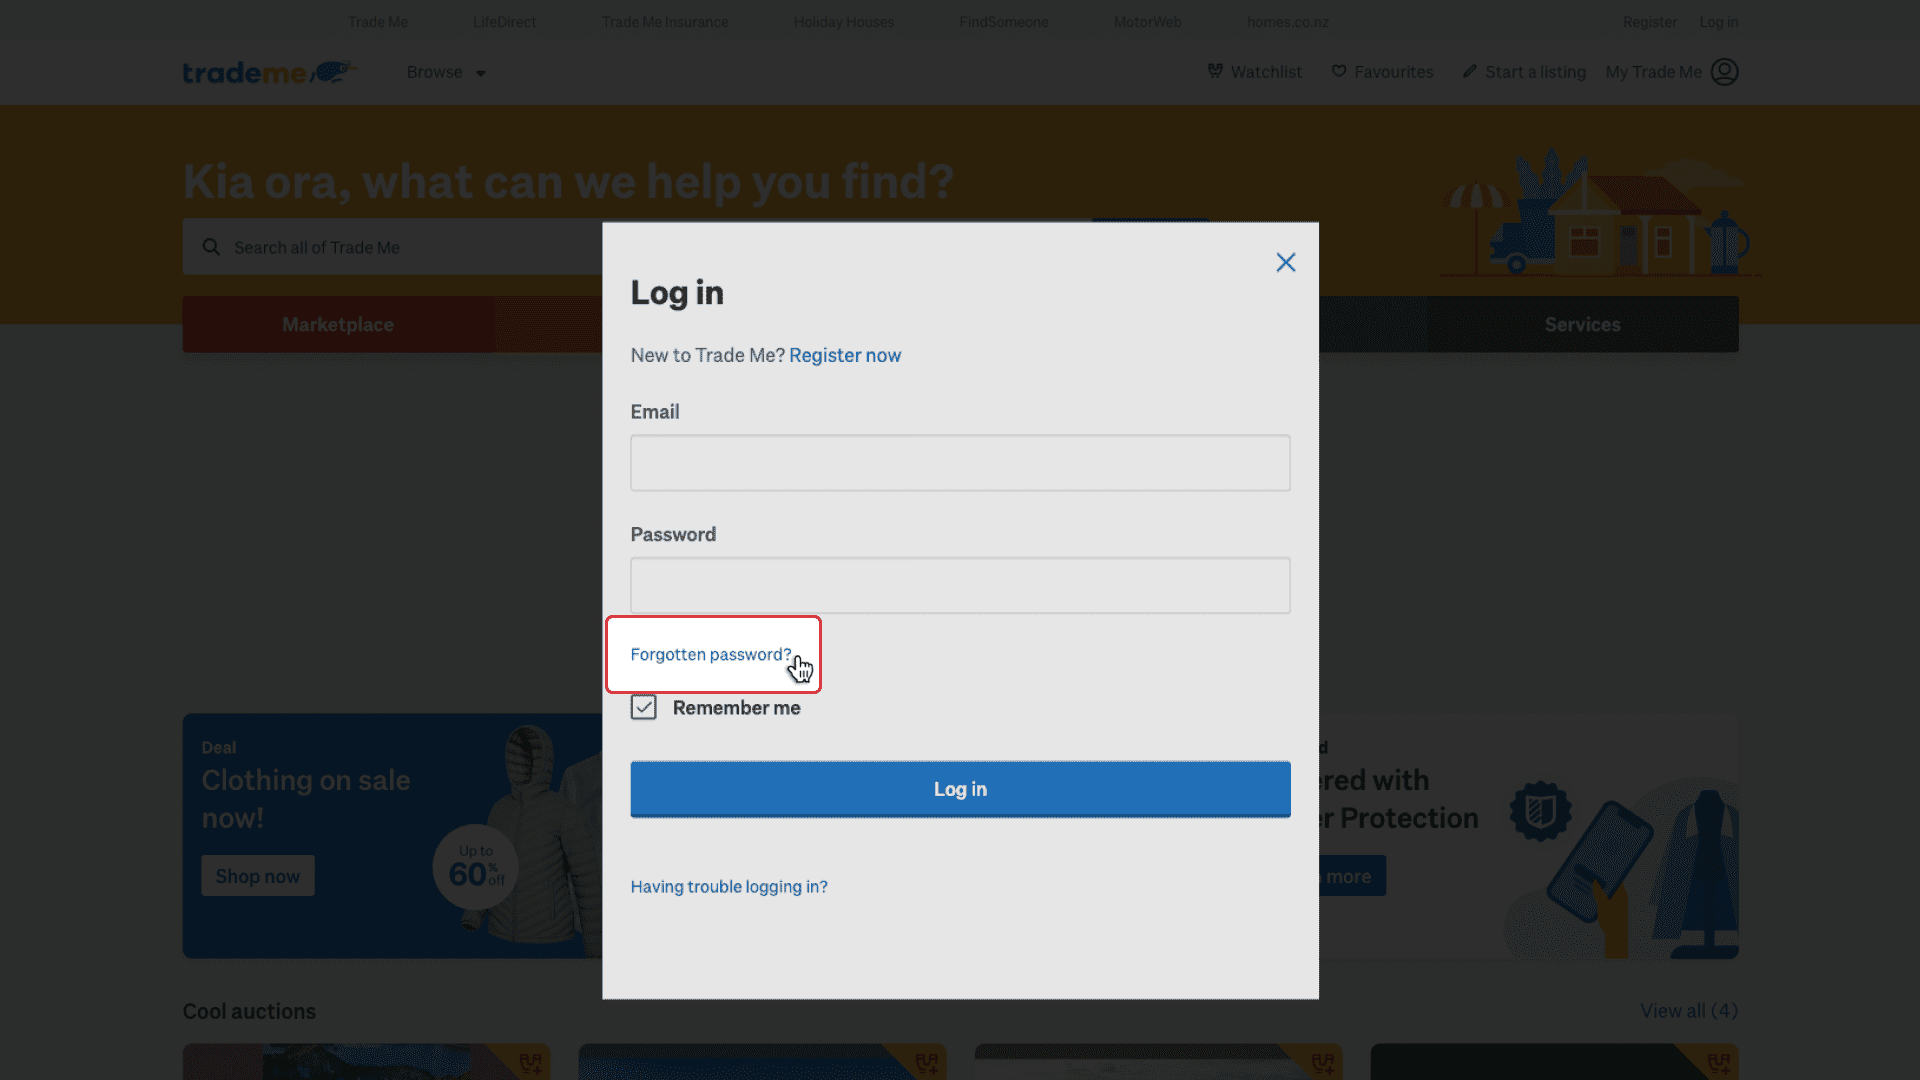 The 'Forgotten password?' button sits directly underneath the 'Password' text field, on the login page.